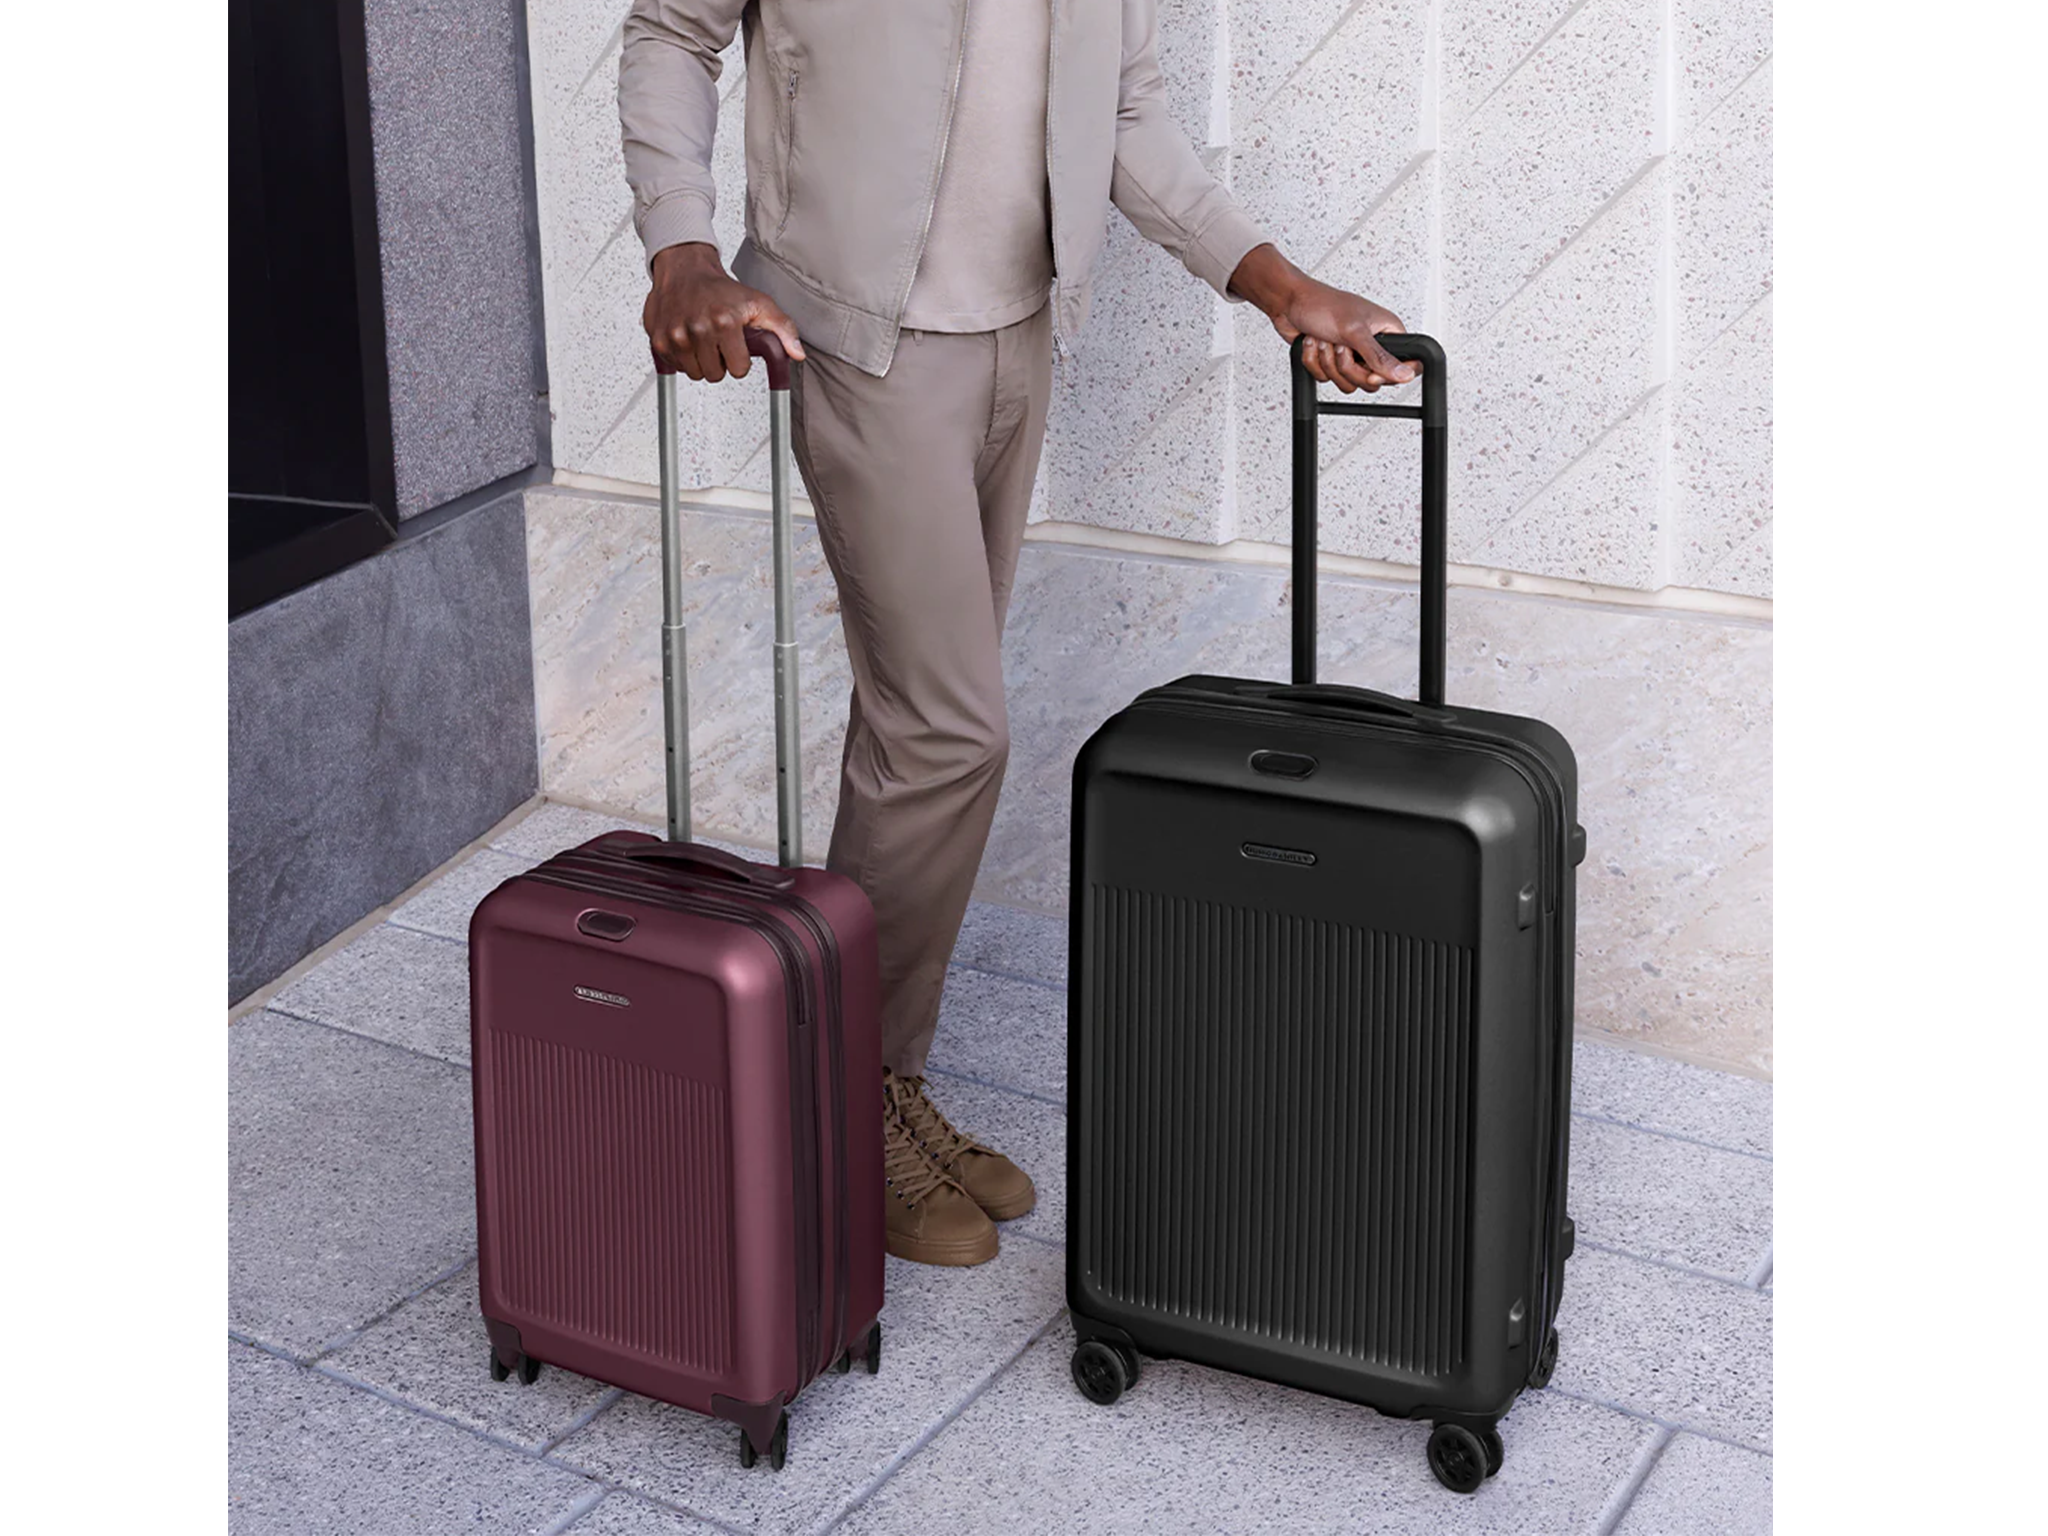 Premium luggage brand Briggs & Riley will be favoured by frequent travellers